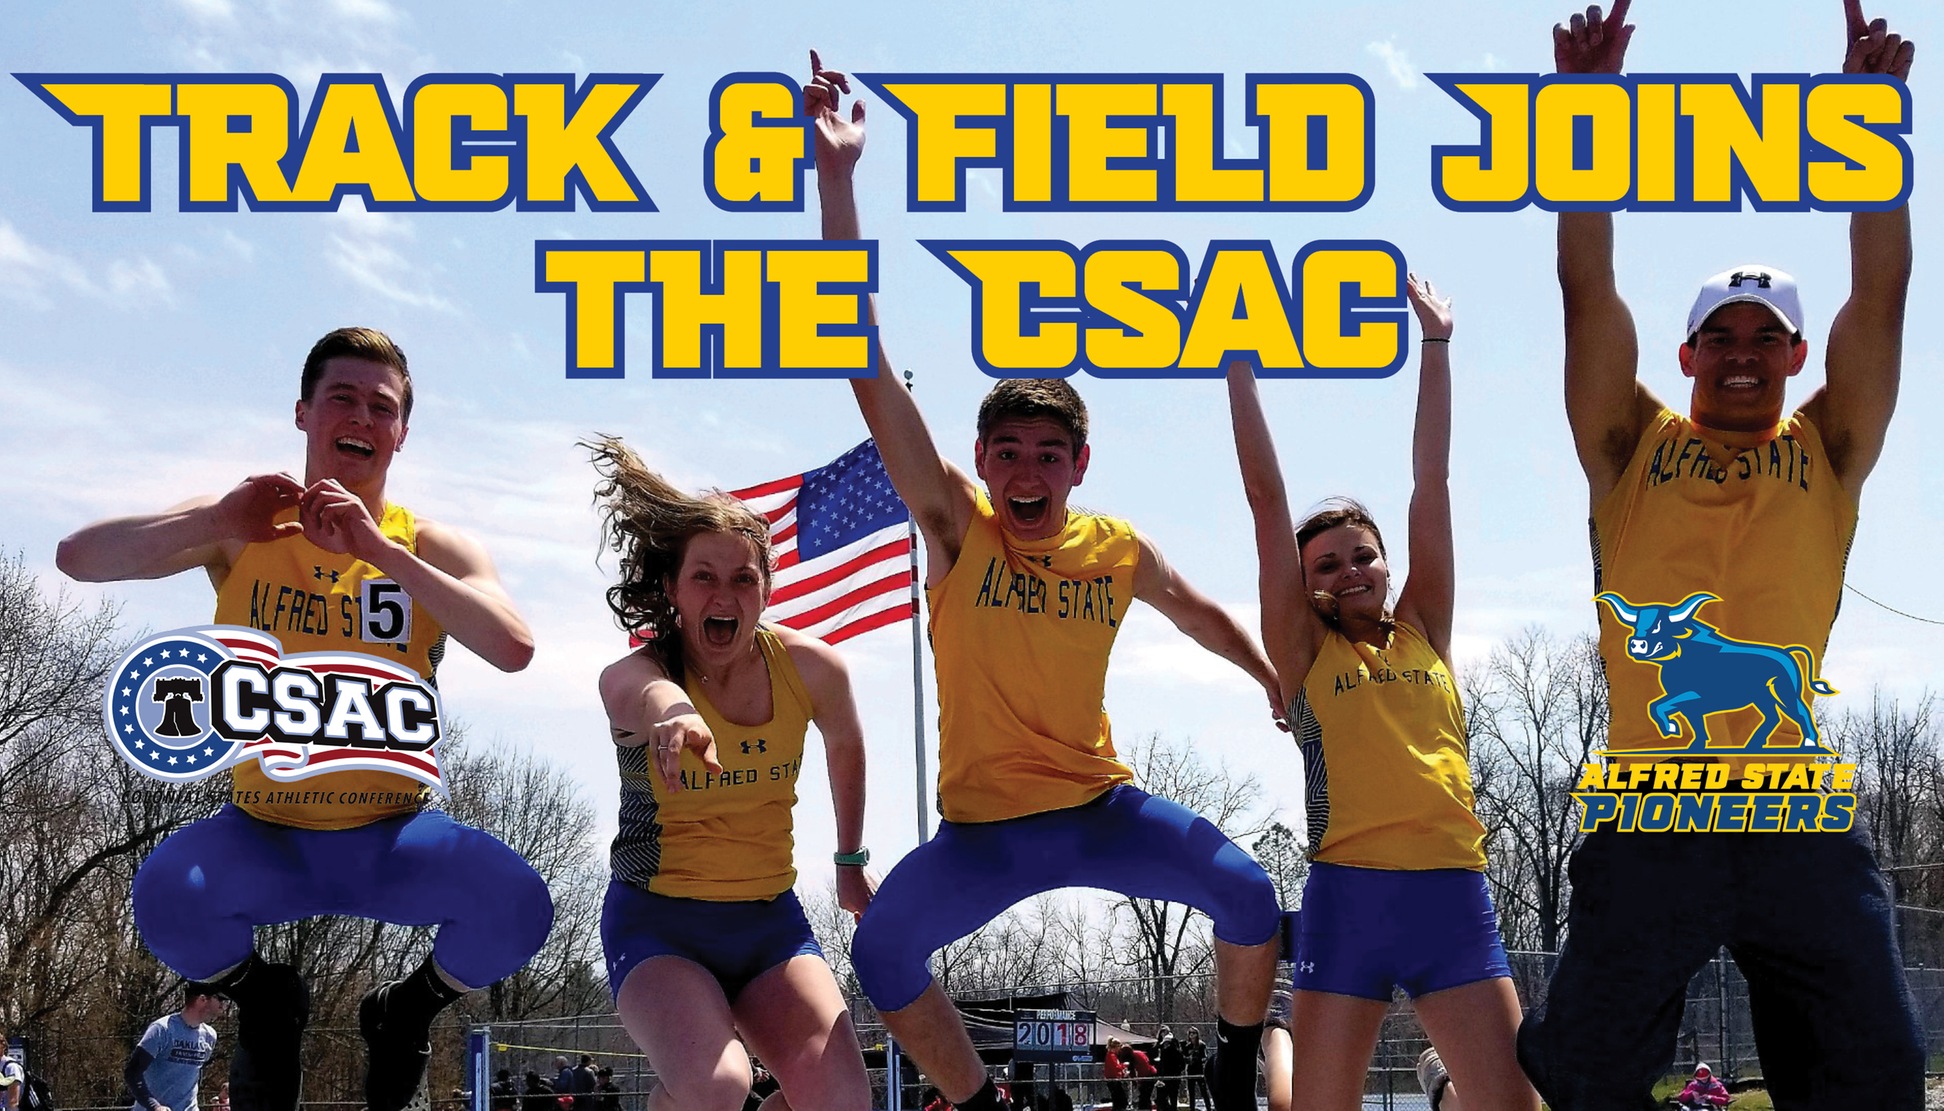 Track & Field joins the CSAC